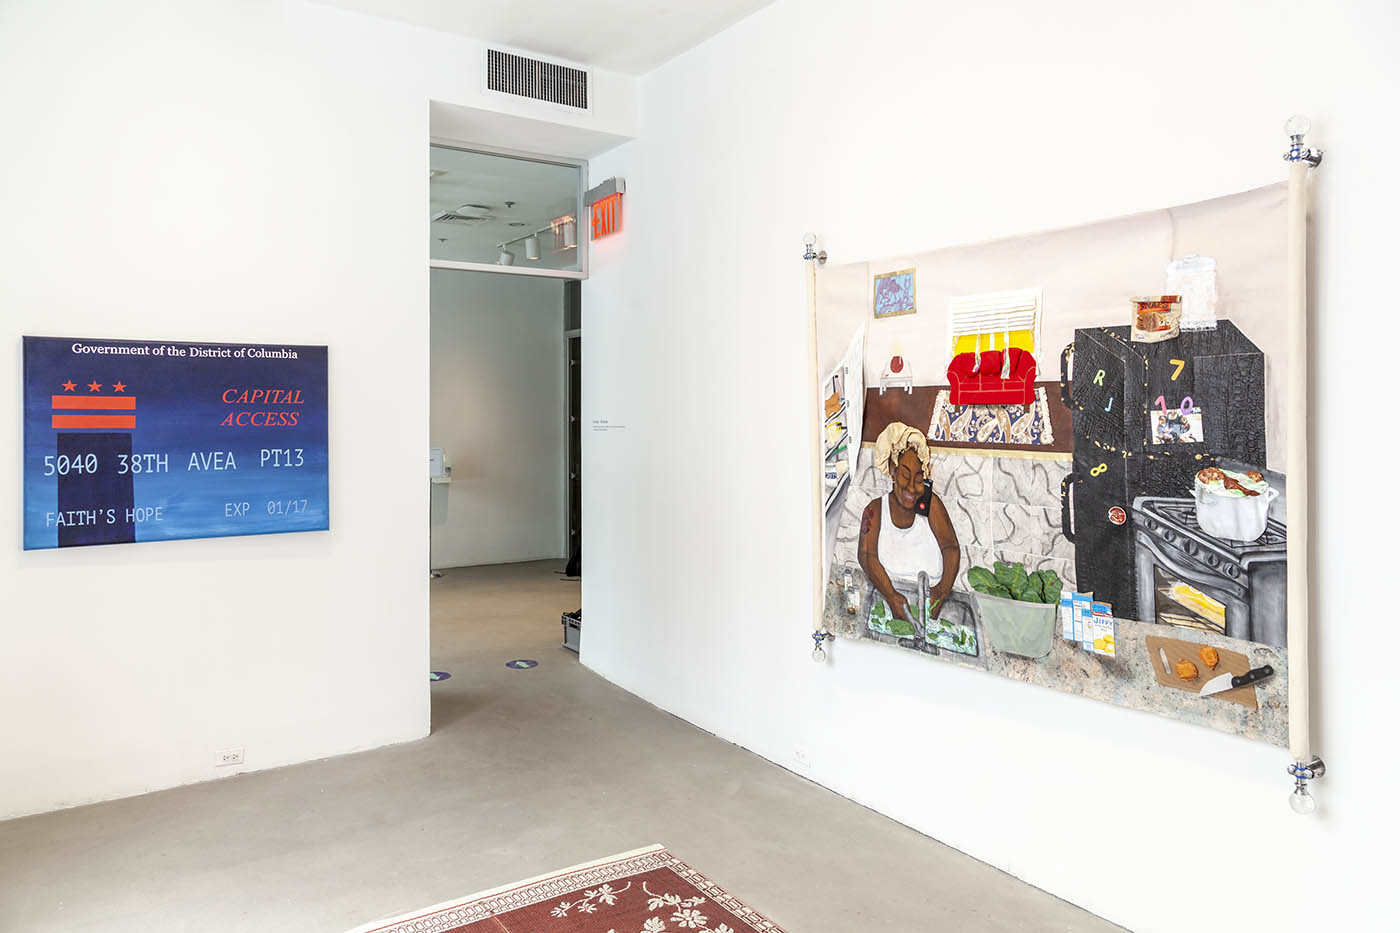 Exhibition view: painting of fake credit card "Capital Access" and large painting of domestic interior.